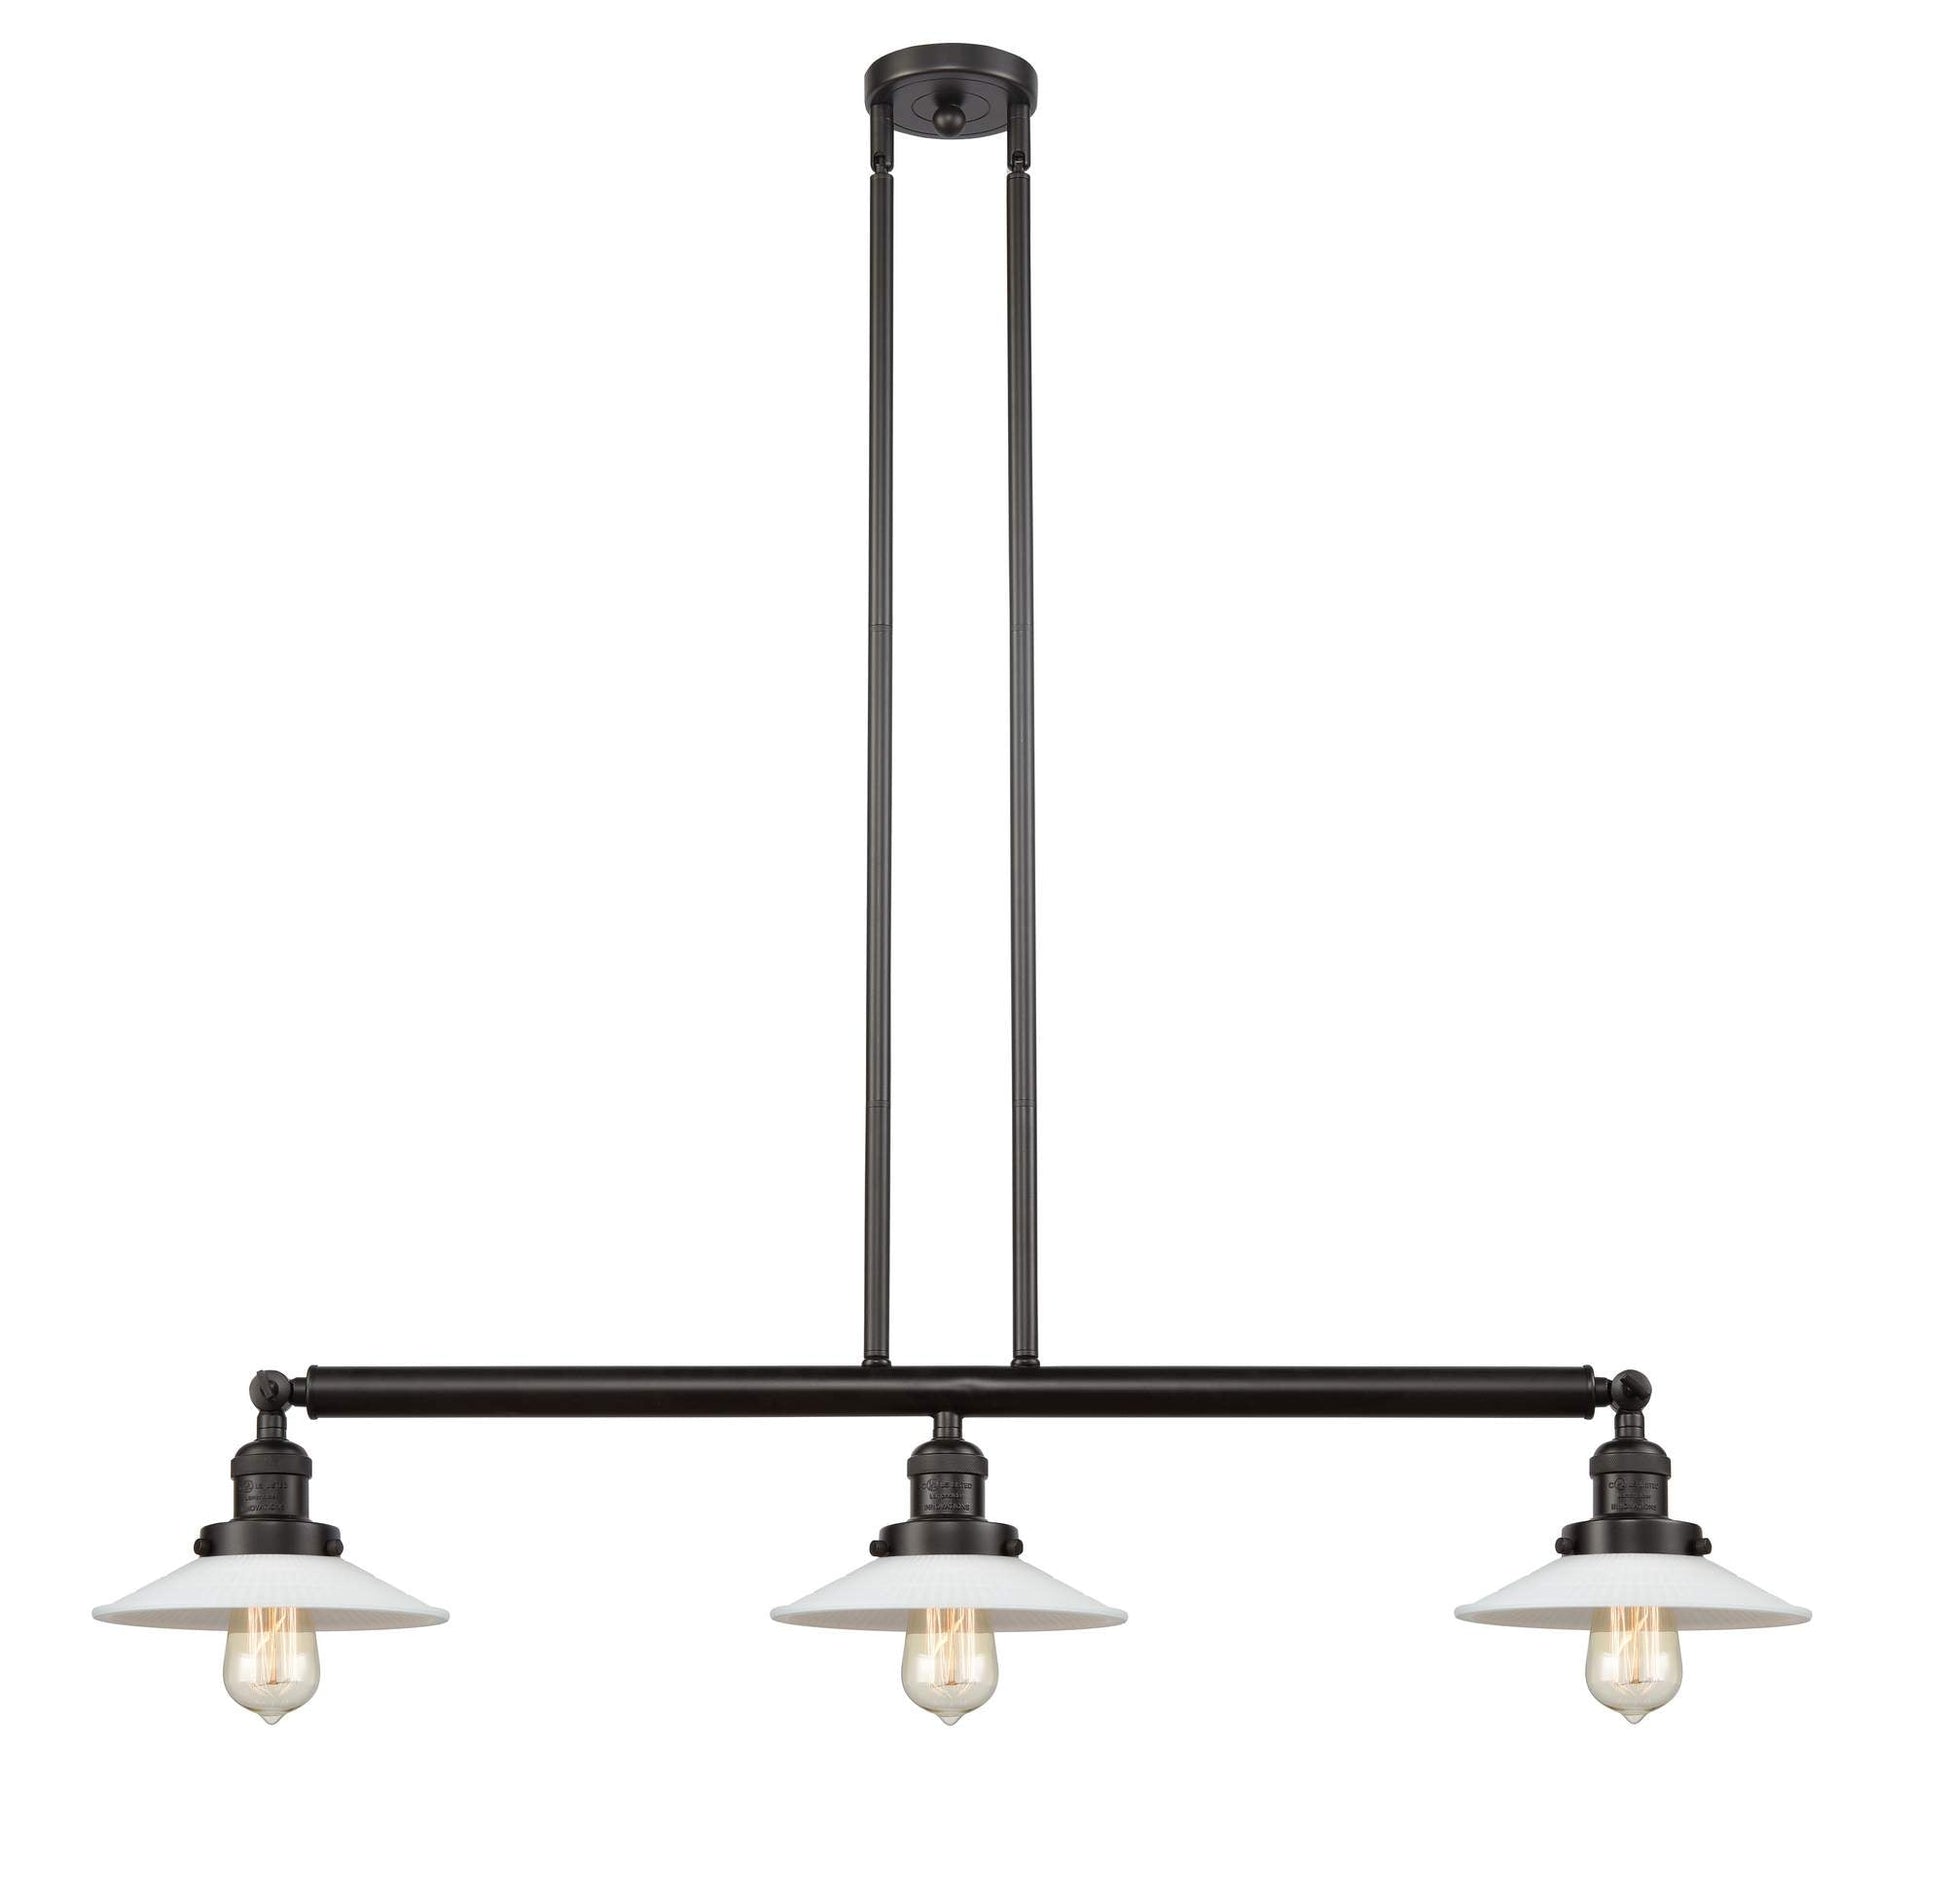 213-OB-G1 3-Light 41" Oil Rubbed Bronze Island Light - White Halophane Glass - LED Bulb - Dimmensions: 41 x 8.5 x 8<br>Minimum Height : 16.25<br>Maximum Height : 40.25 - Sloped Ceiling Compatible: Yes